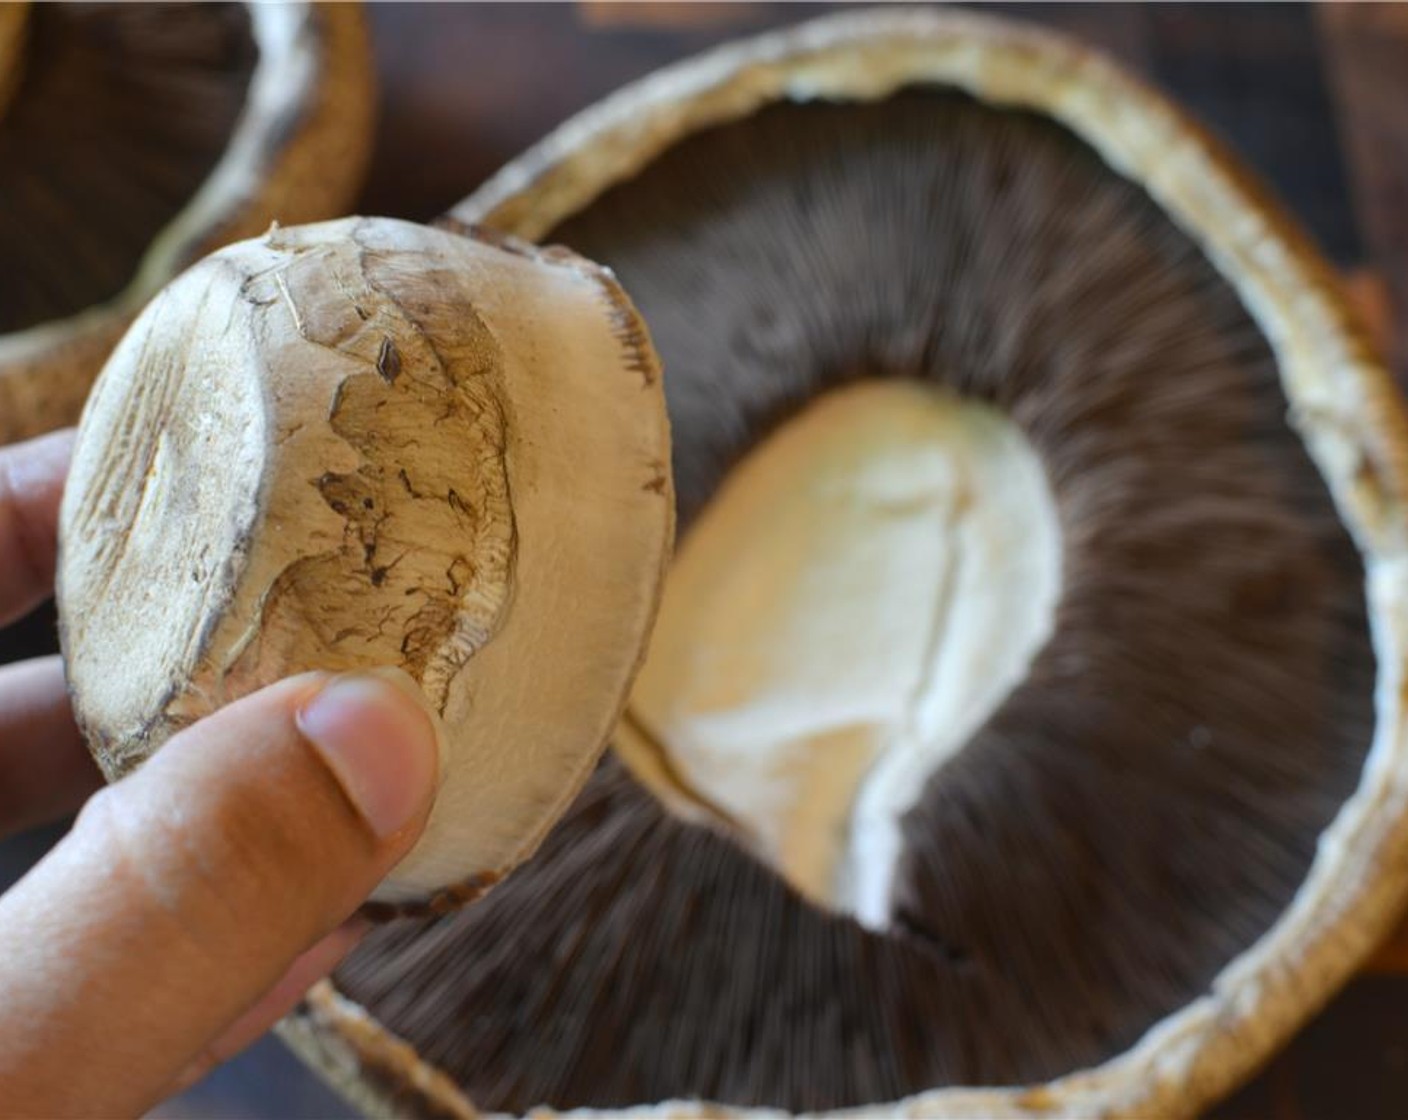 step 1 Start by cleaning the Large Portobello Mushrooms (2). To do this, first gently pull out the stem by twisting and pulling on it.